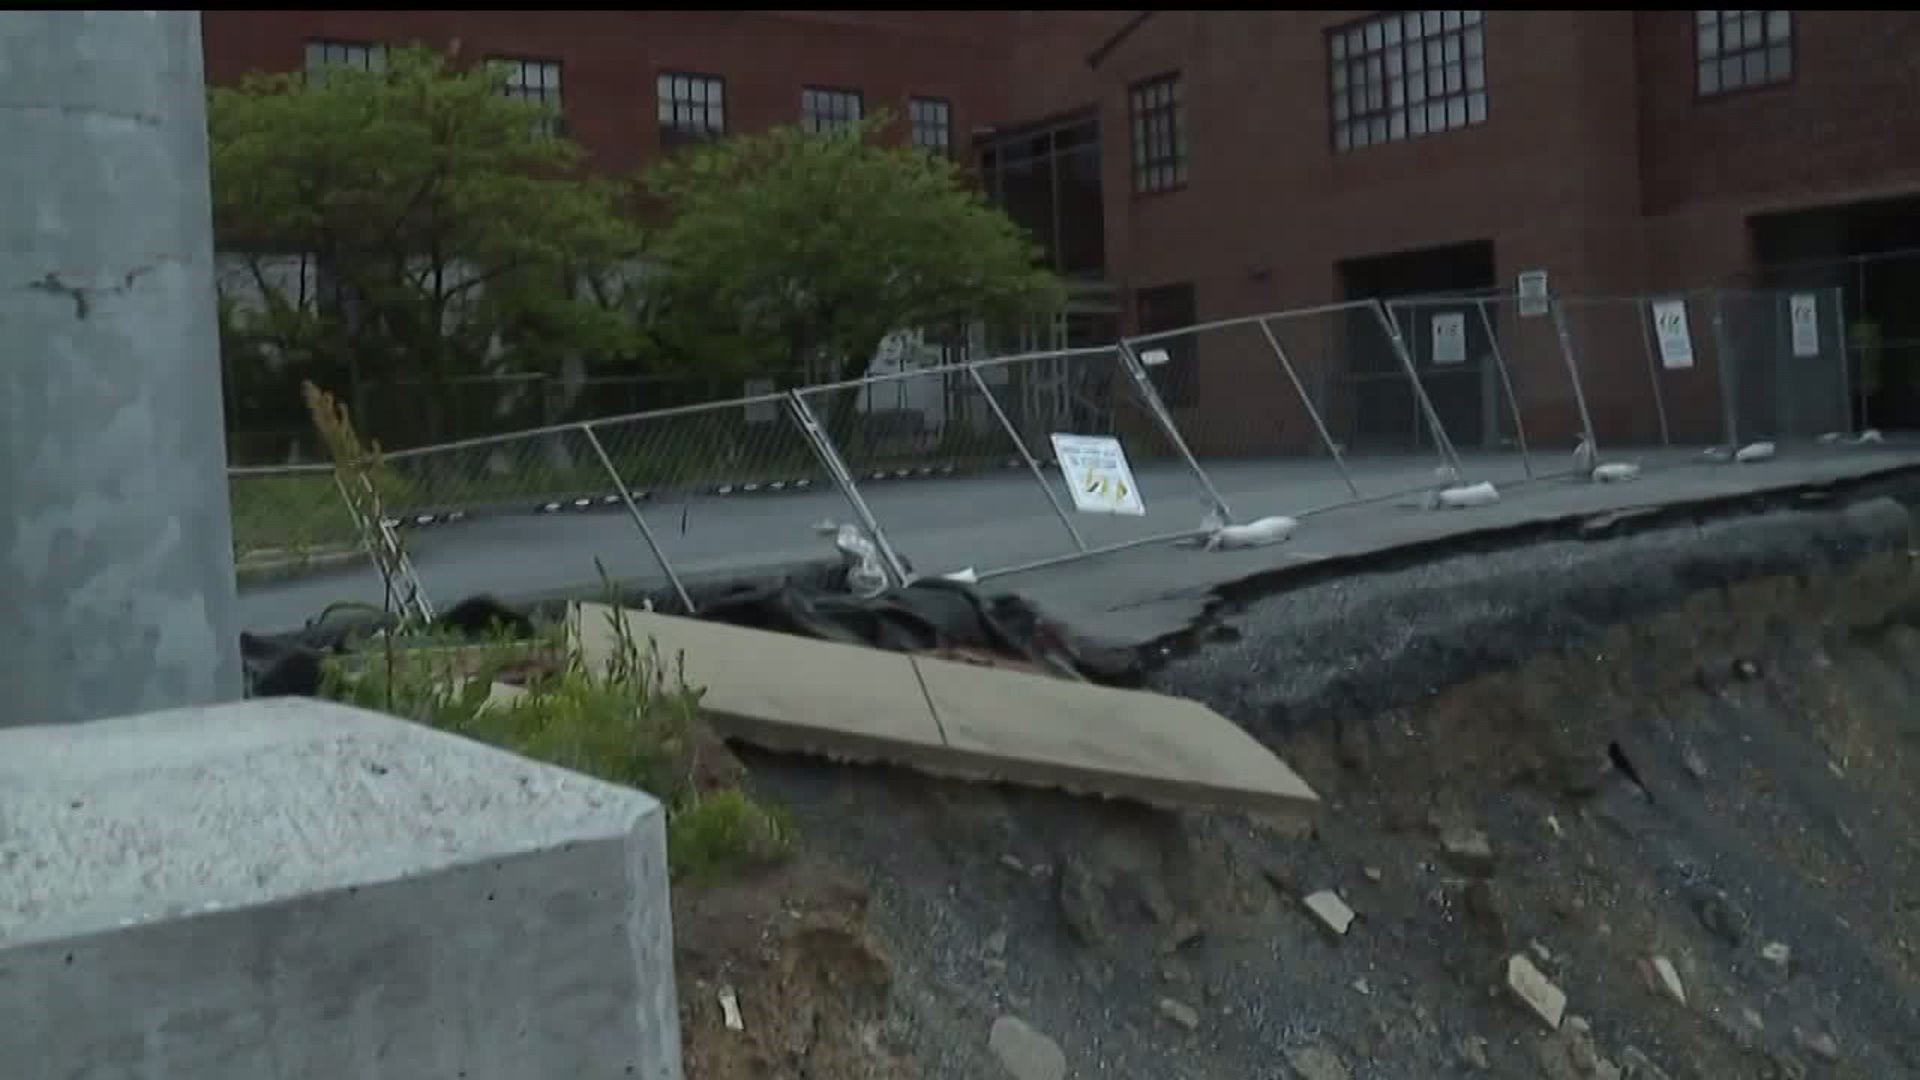 Judge issues order on wall collapse in Harrisburg